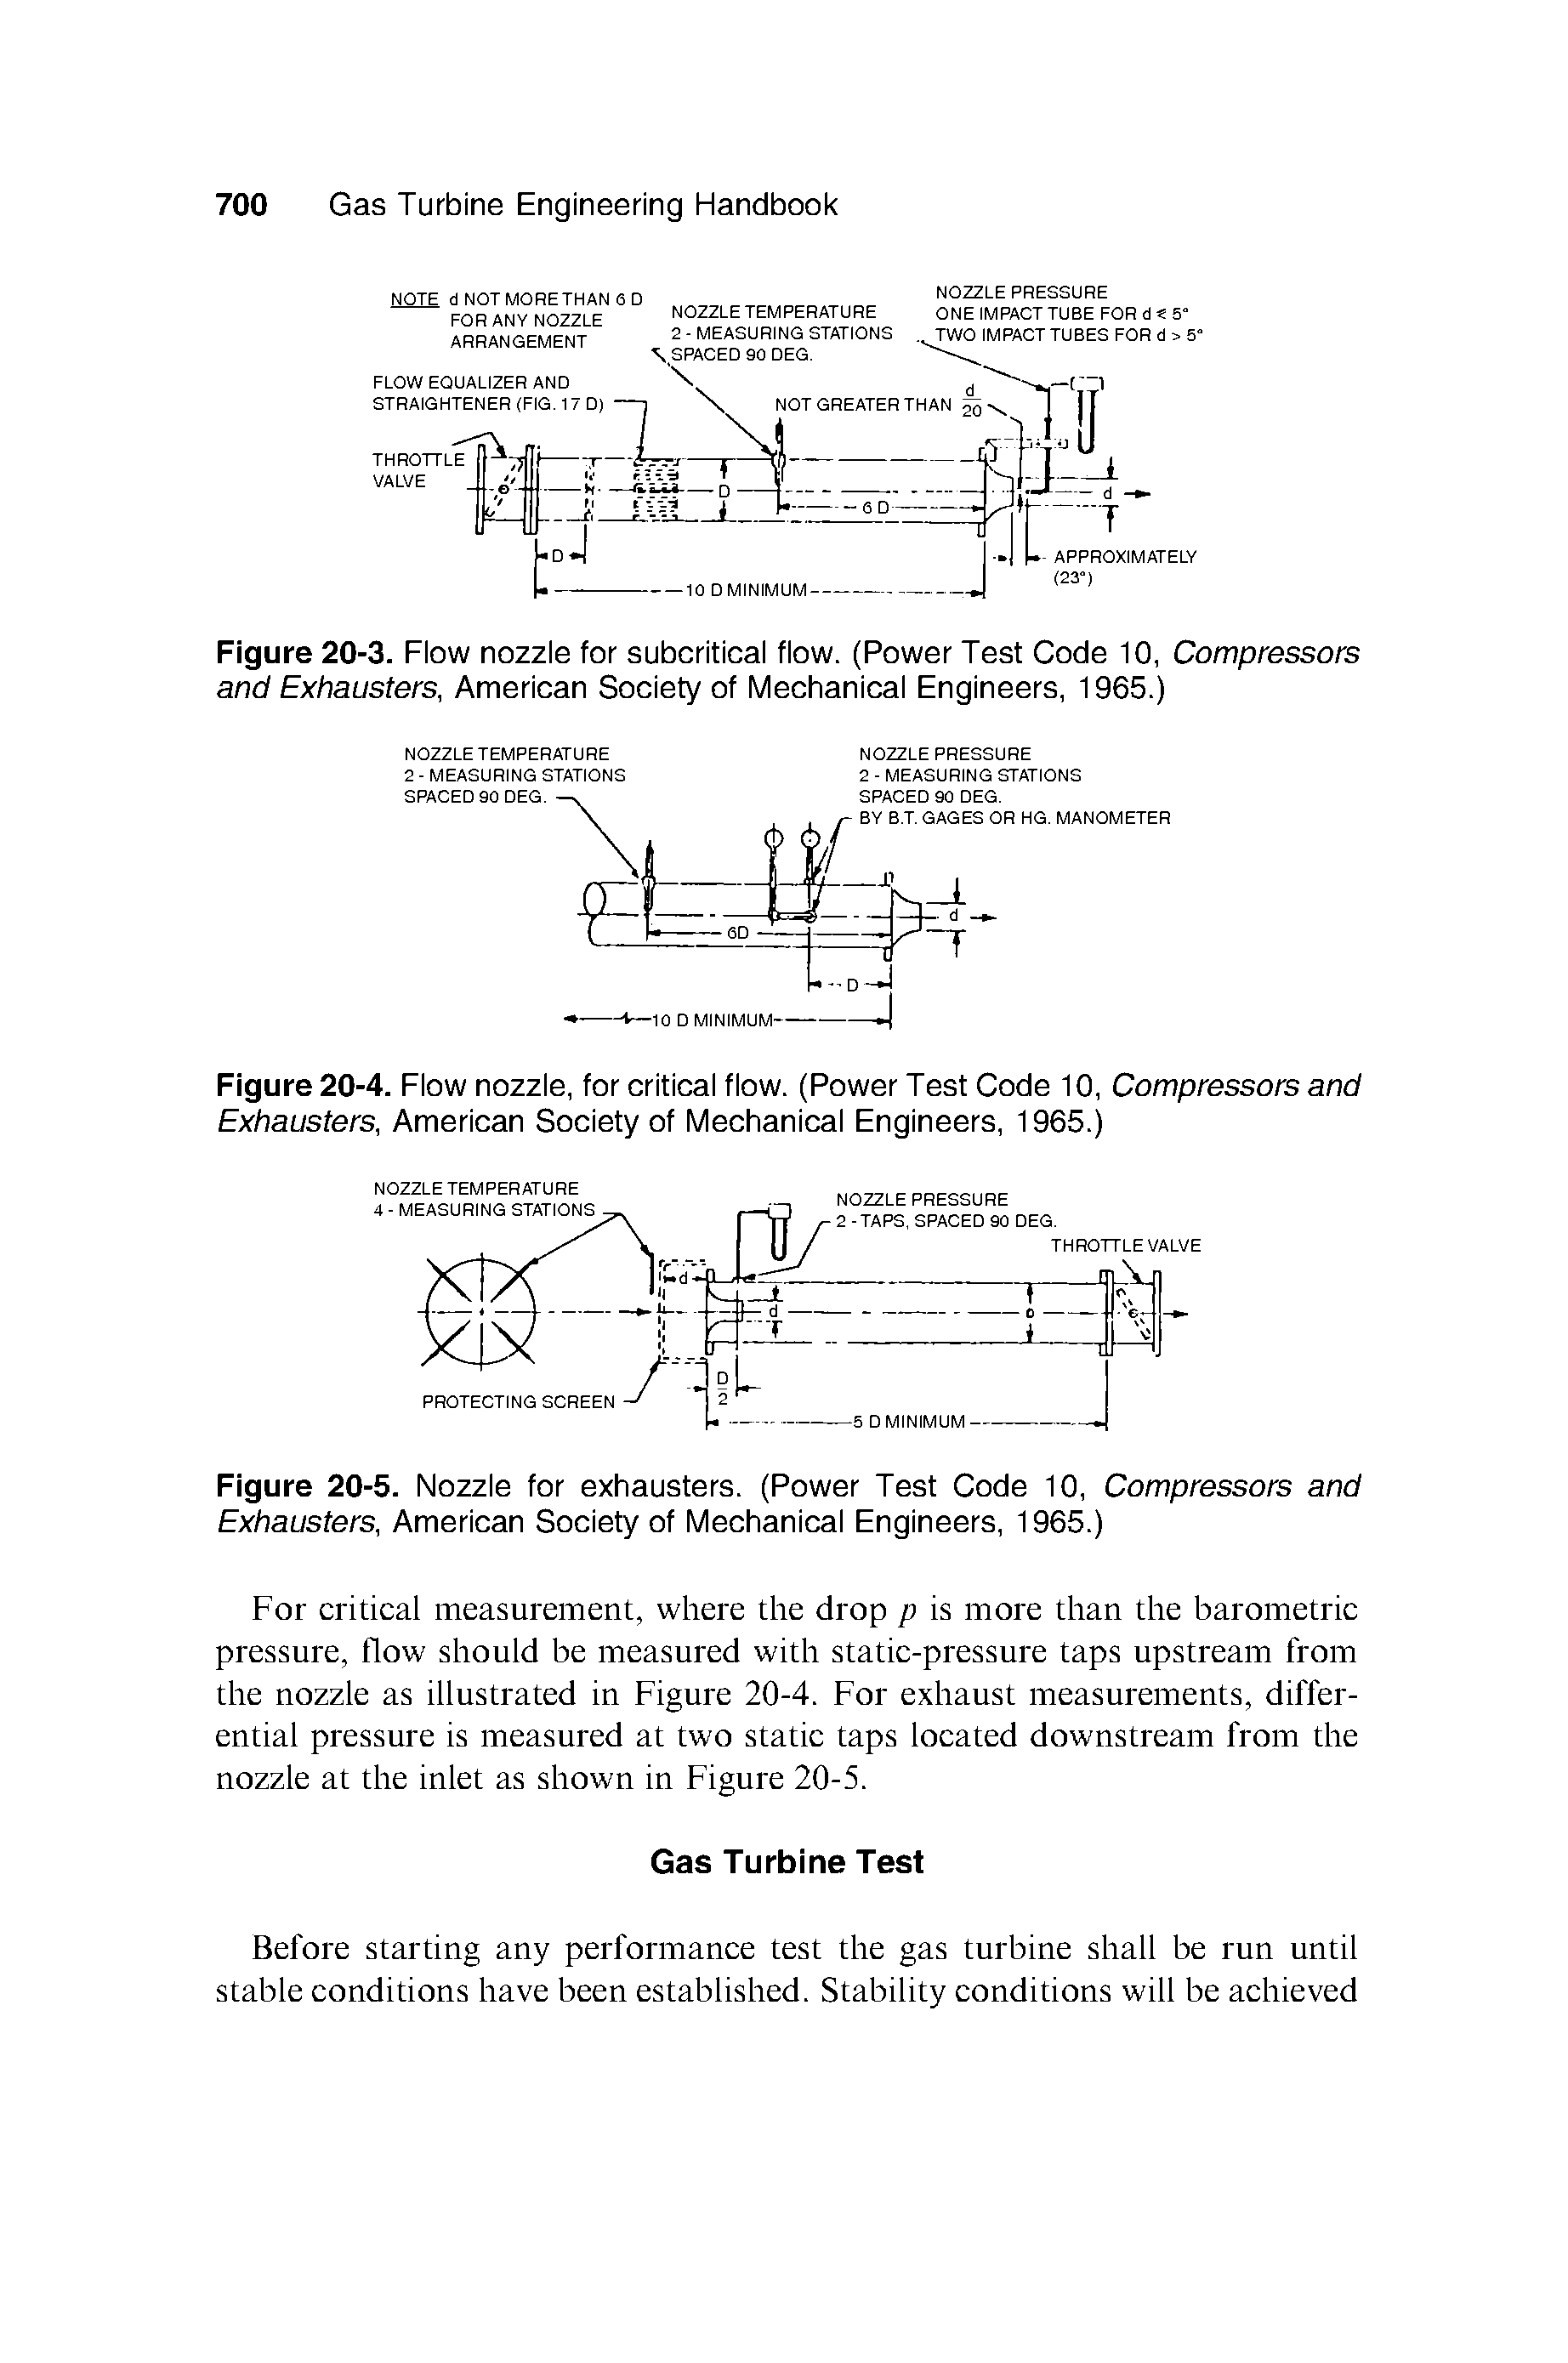 Figure 20-3. Flow nozzle for subcritical flow. (Power Test Code 10, Compressors and Exhausters, American Society of Mechanical Engineers, 1965.)...